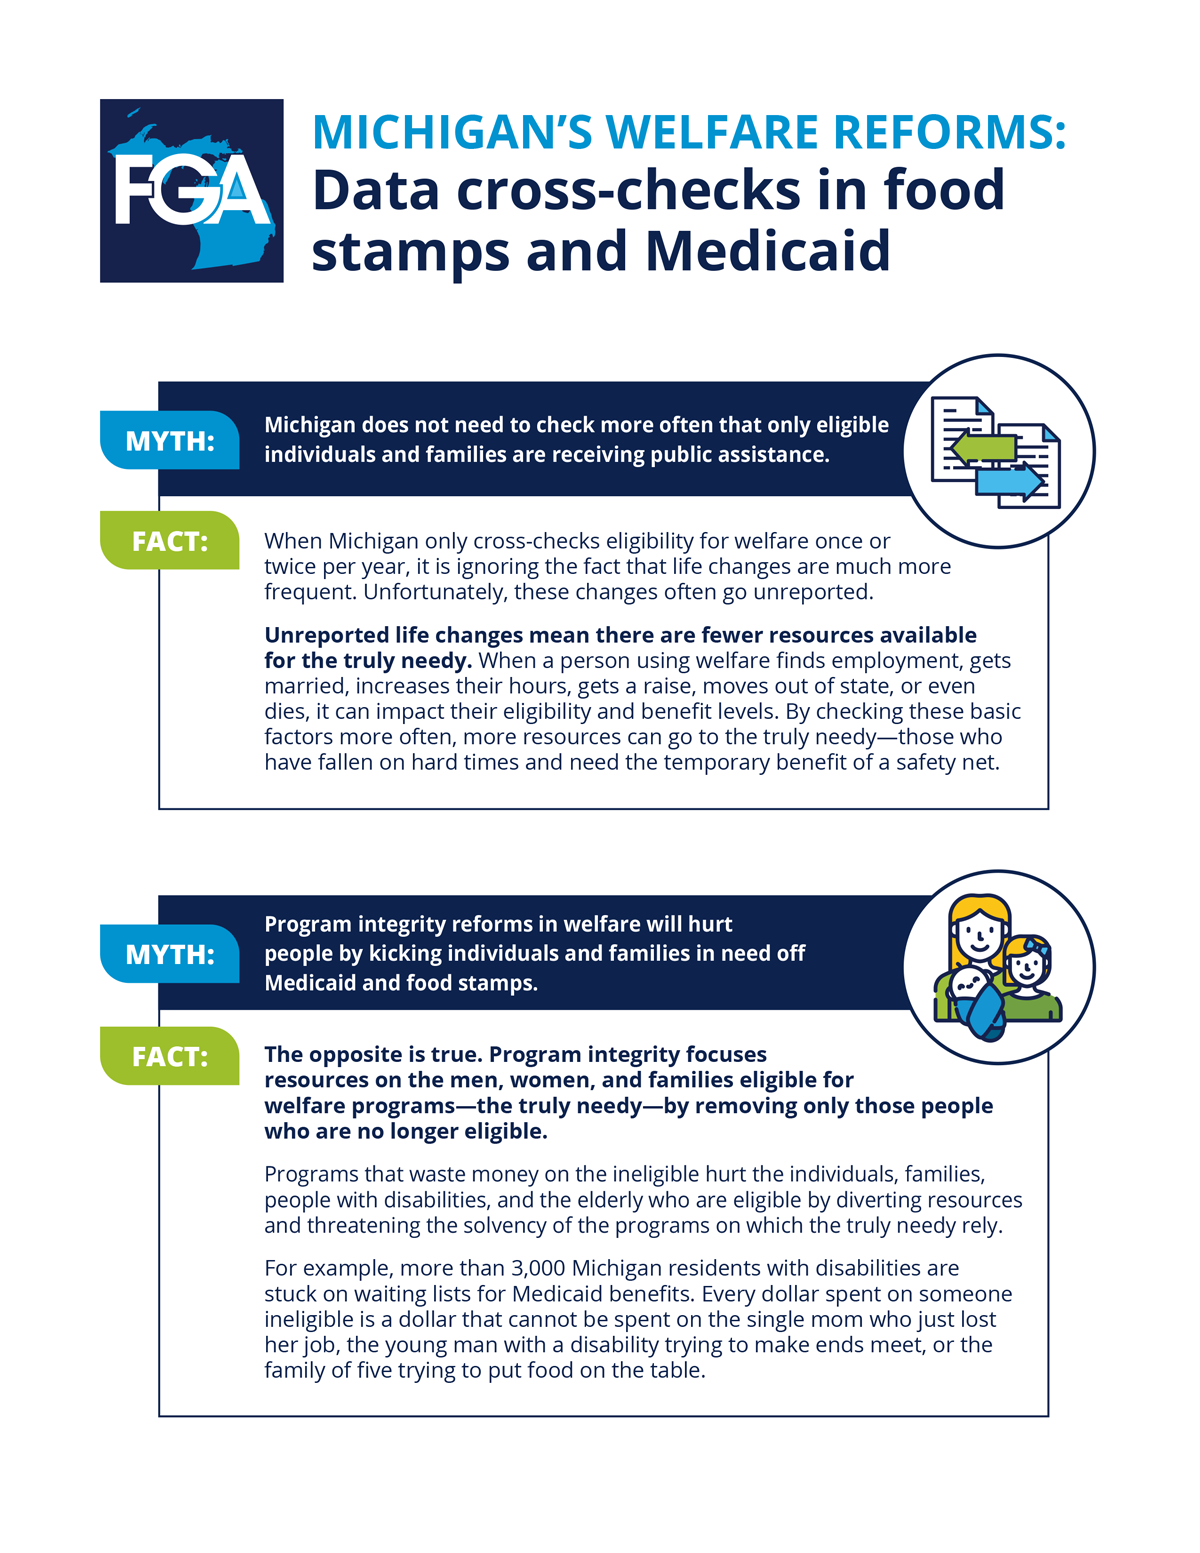 MICHIGAN’S WELFARE REFORMS Data crosschecks in food stamps and Medicaid